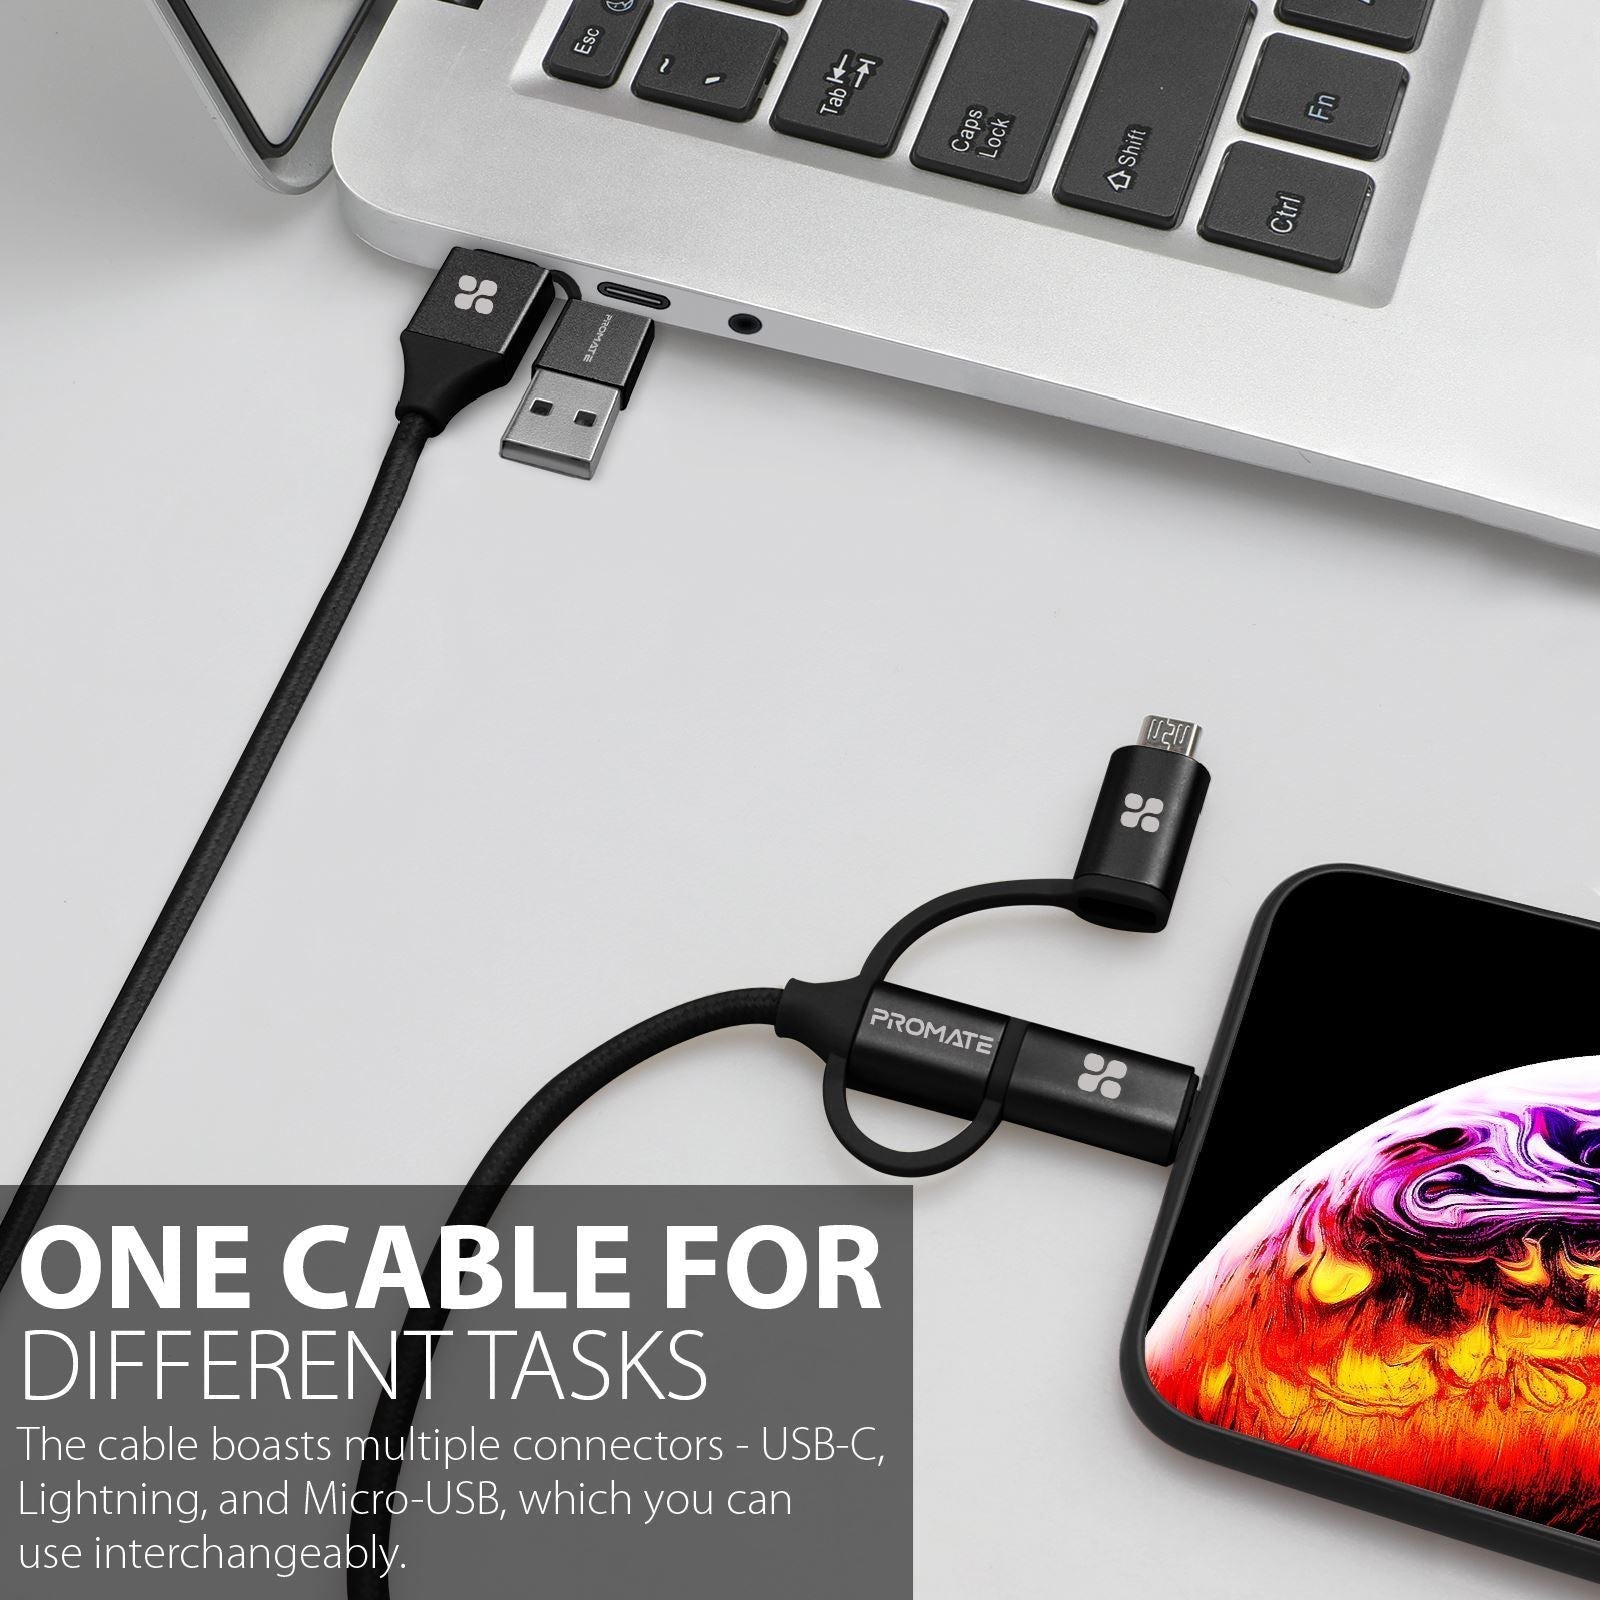 PROMATE_6-in-1_Hybrid_1.2m_Multi-Connector_Cable_for_Charging_&_Data_Transfer._60W_Power_Delivery_USB-C_to_USB-C._Micro-USB,_USB-C,_Lightning_Connector._Black_Colour. 1563